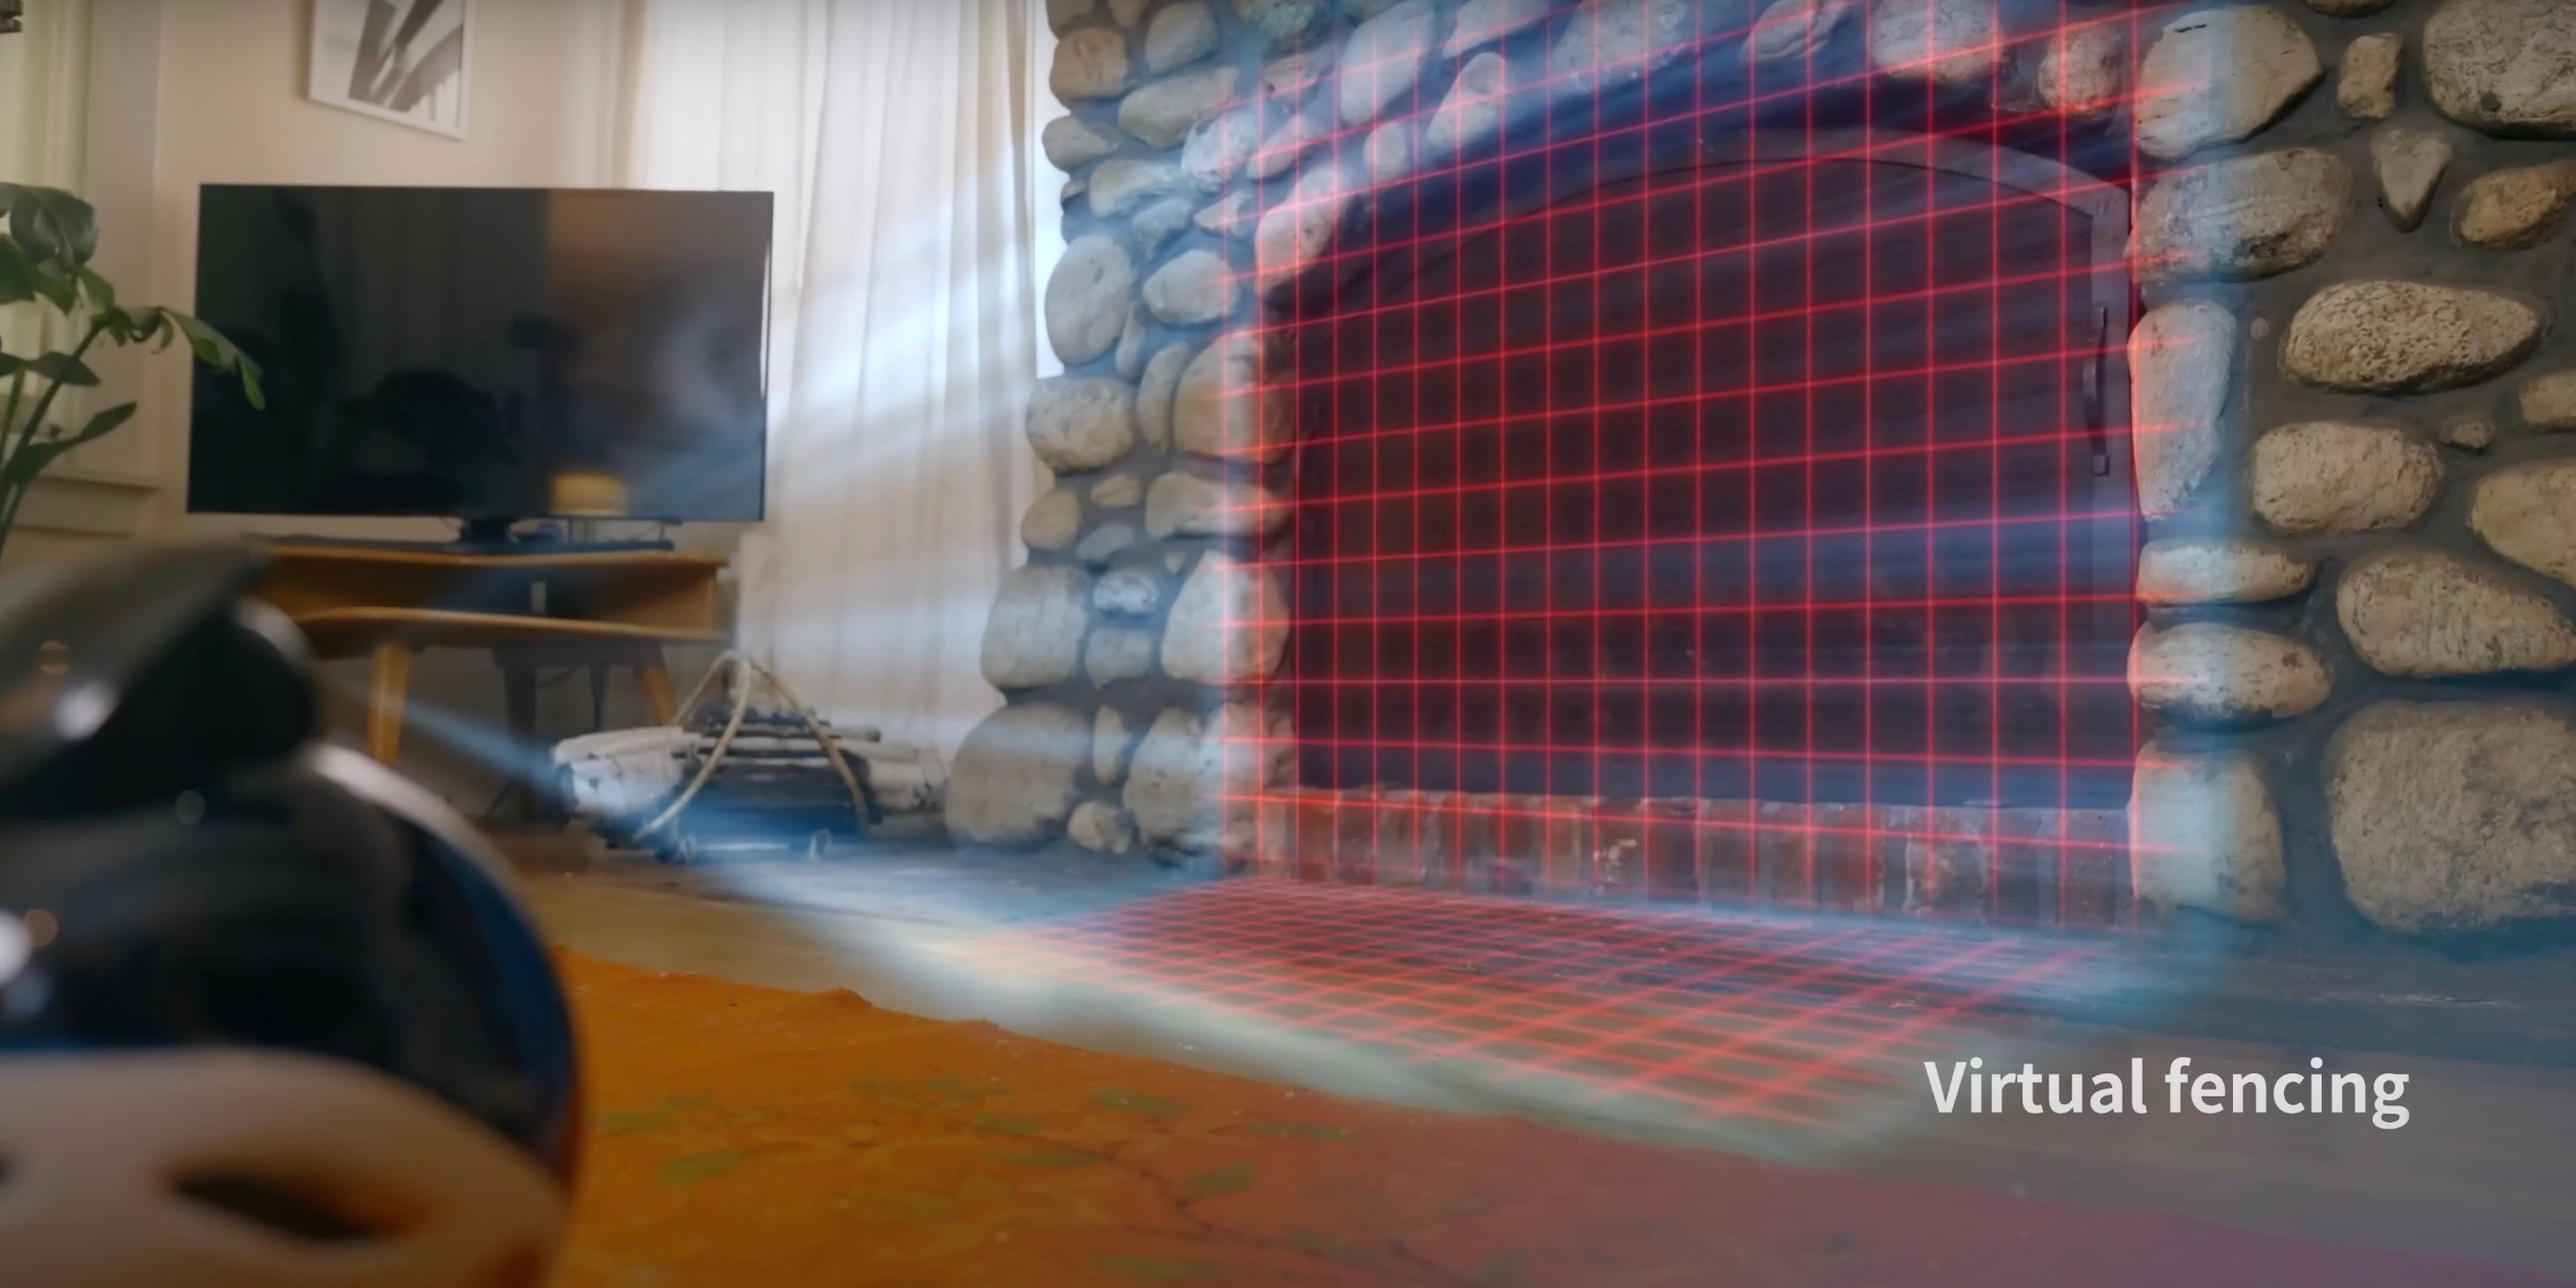 Ebo X is pictured in the foreground left corner facing a fireplace, with its scanning sensors visualized in front of it in a red grid to mark the area off limits